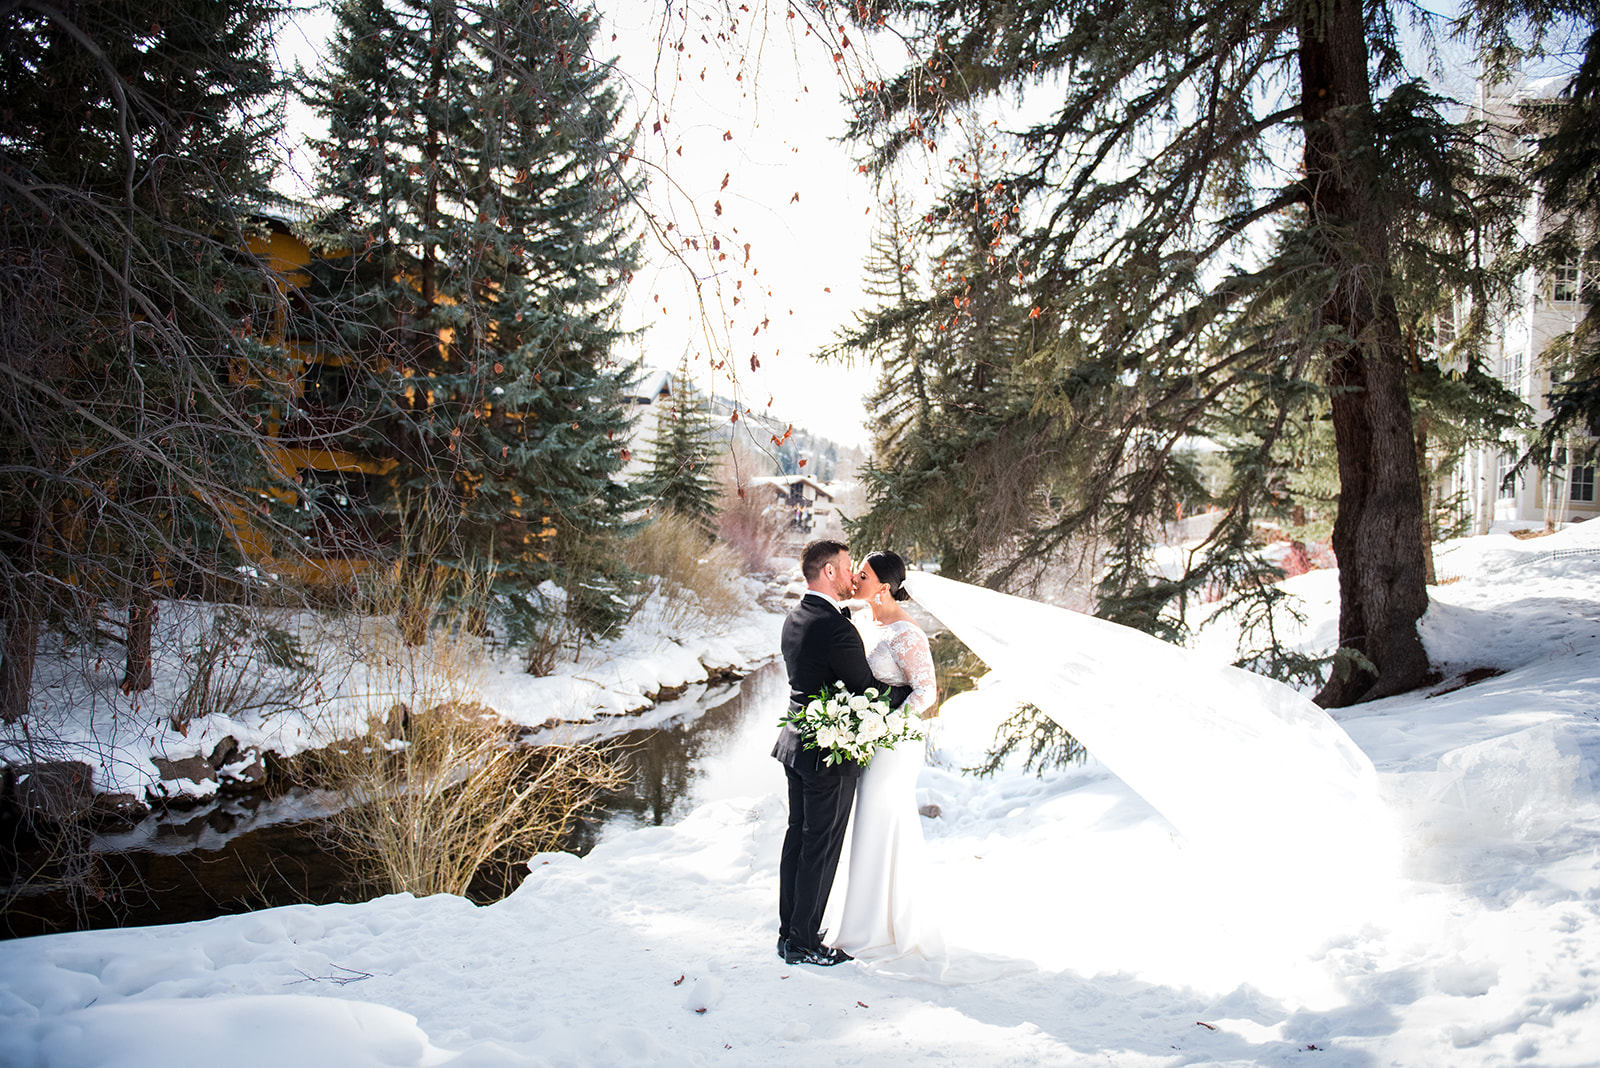 Bride and groom standing in the snow kissing as the bride's veil blows in the wind.